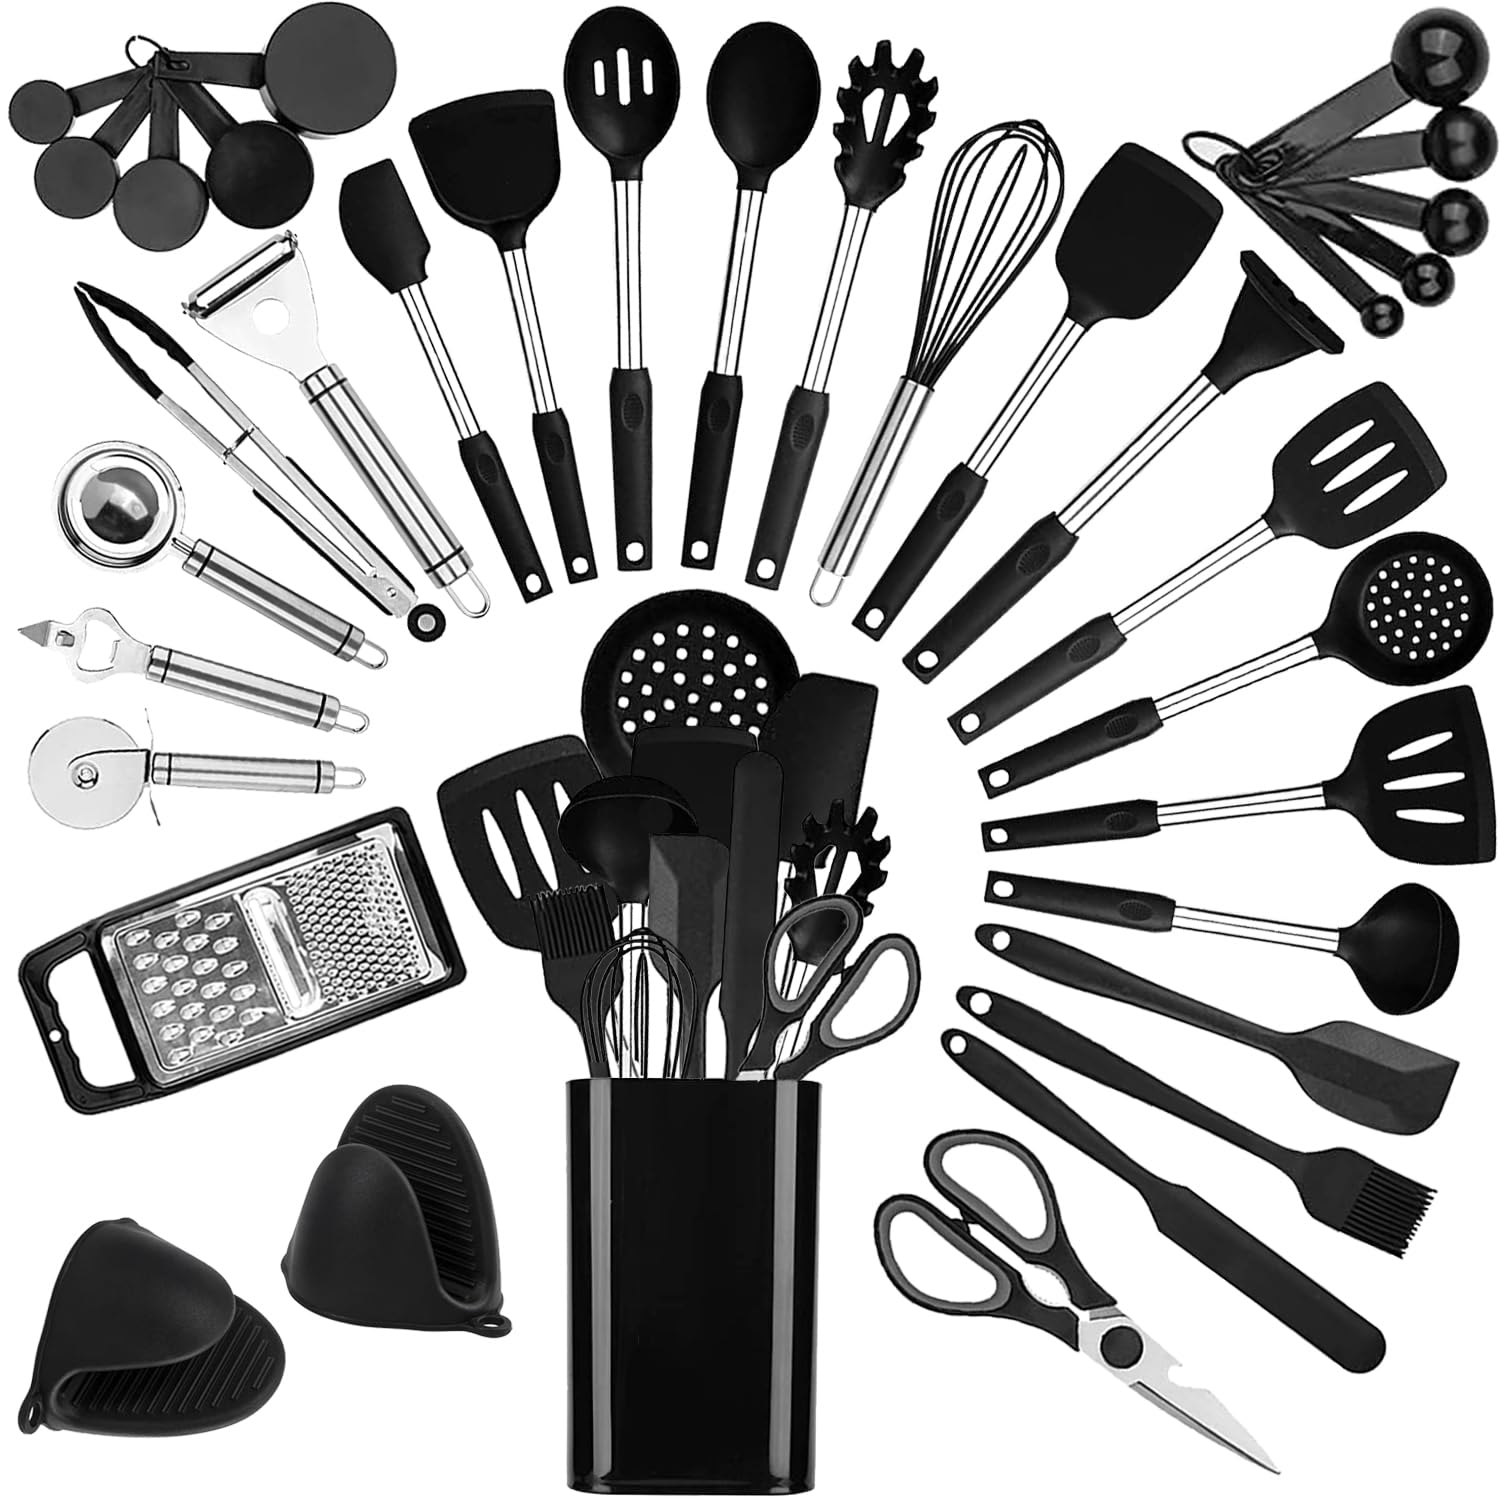 35 Pcs kithcen Utensils set Cooking Utensils set with Holder Silicone and Stainless Steel Utensils Set Kitchen Tool Set,Baking Set Kitchen Set Kitchen Gadgets Kitchen Tools Cookware Set